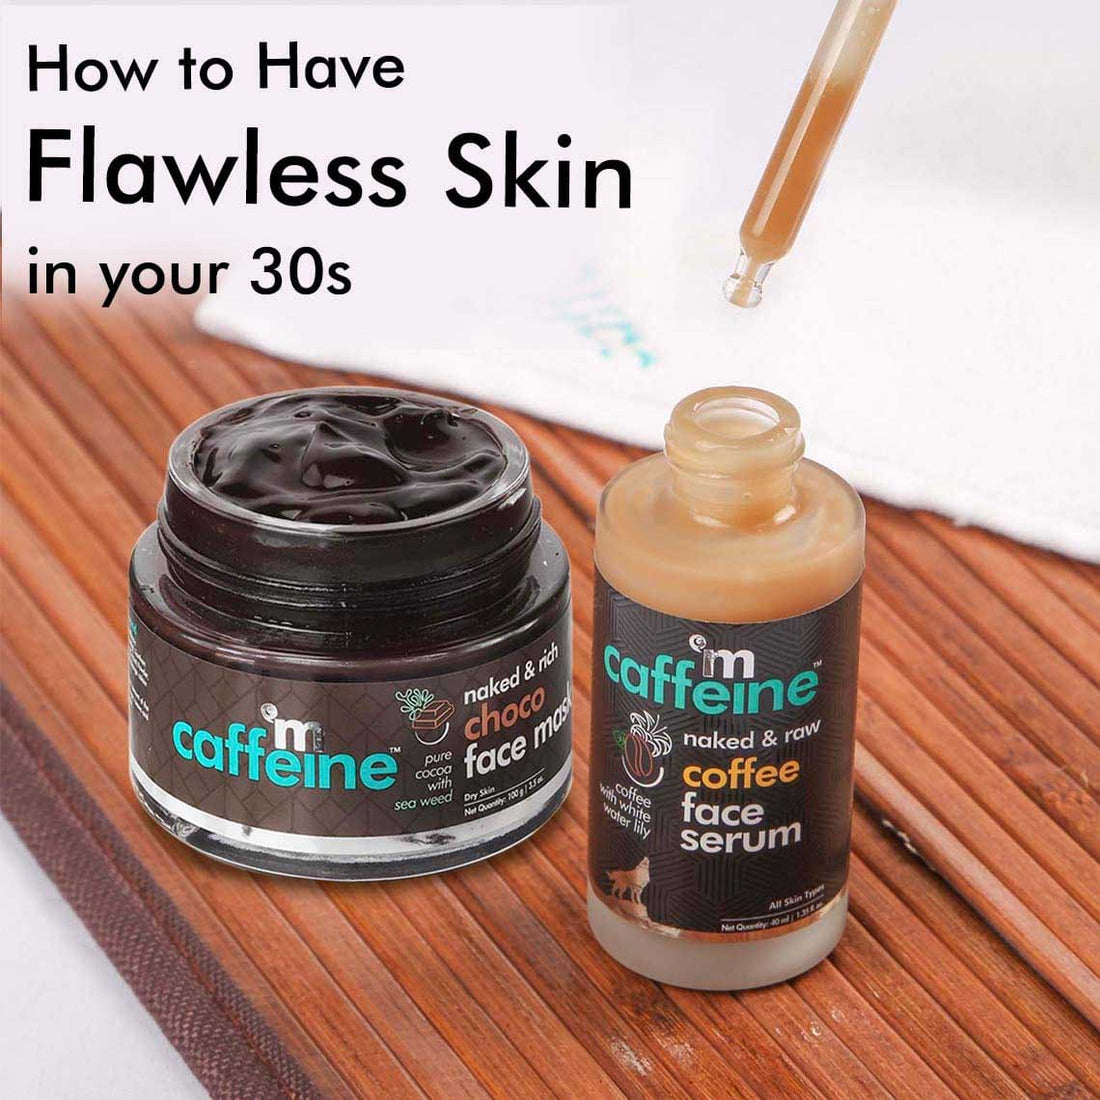 How to Have Flawless Skin in your 30s